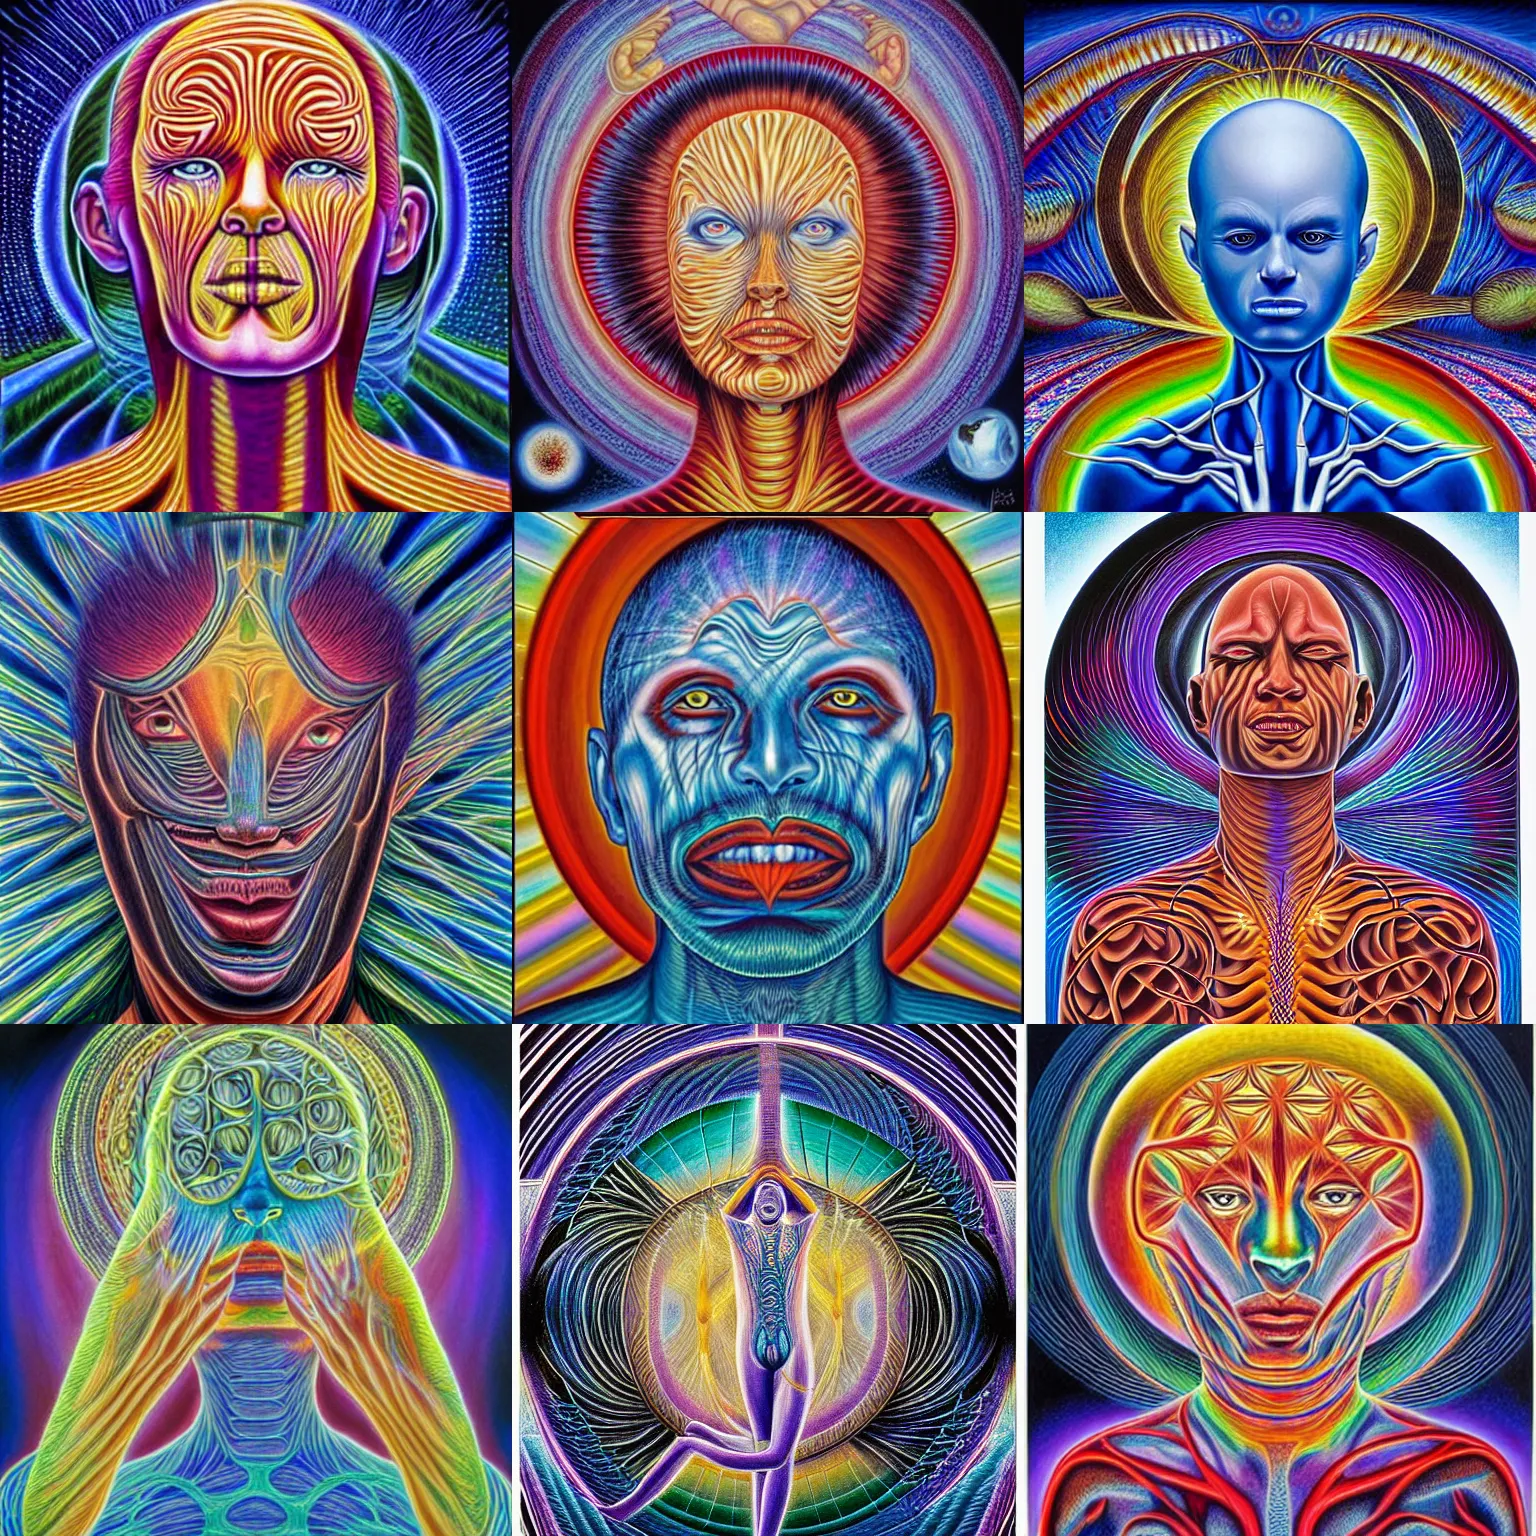 Prompt: The Dream, by Alex Grey.